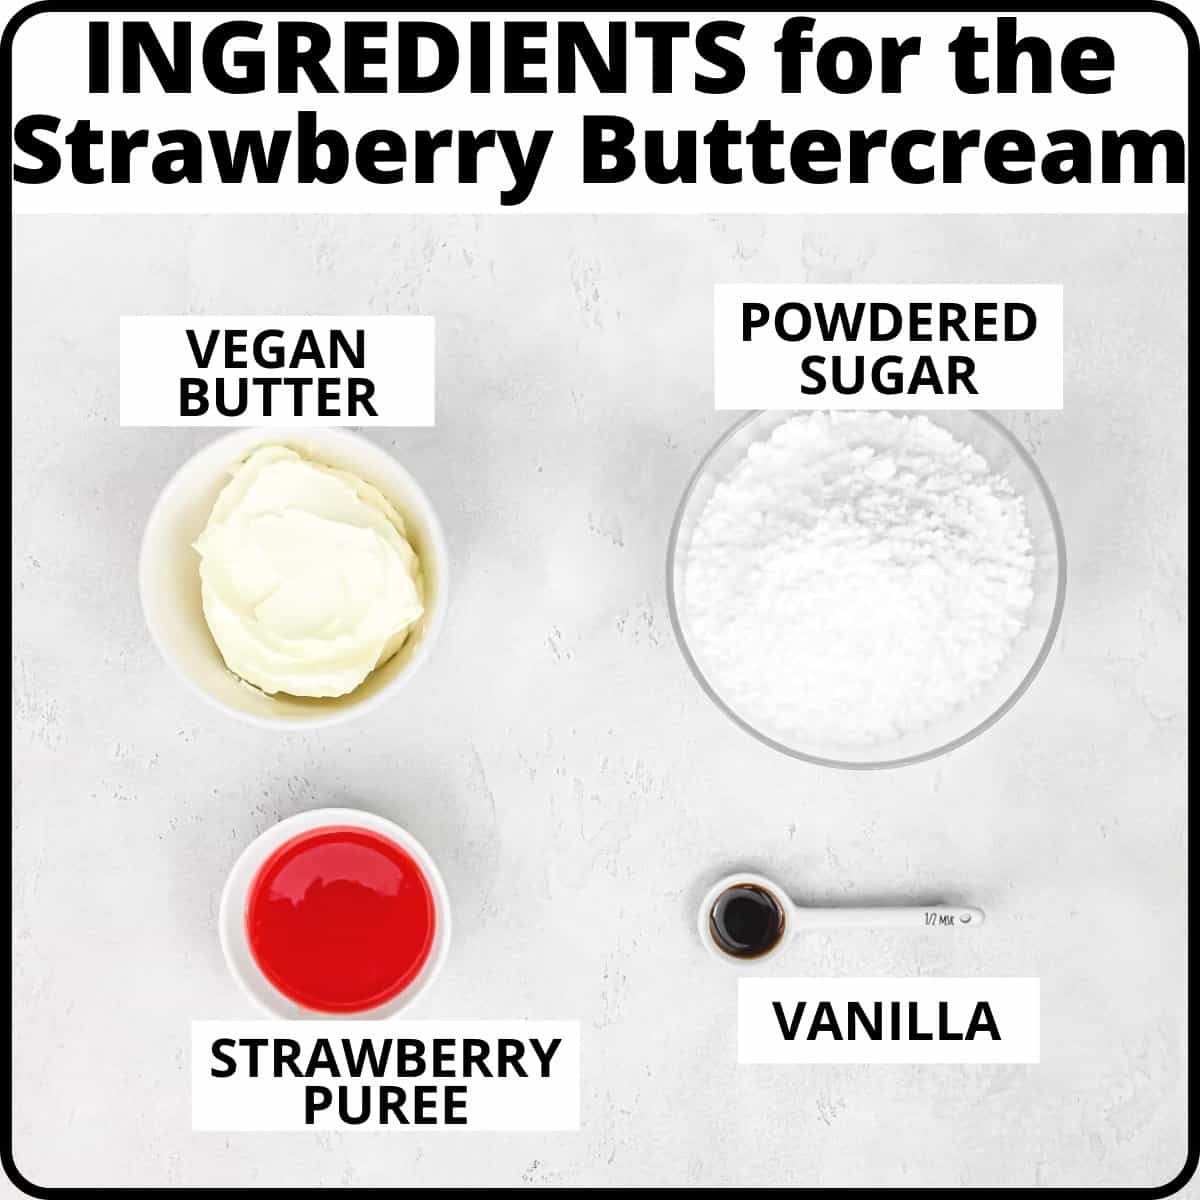 Ingredients for the strawberry buttercream: vegan butter, strawberry puree and vanilla.